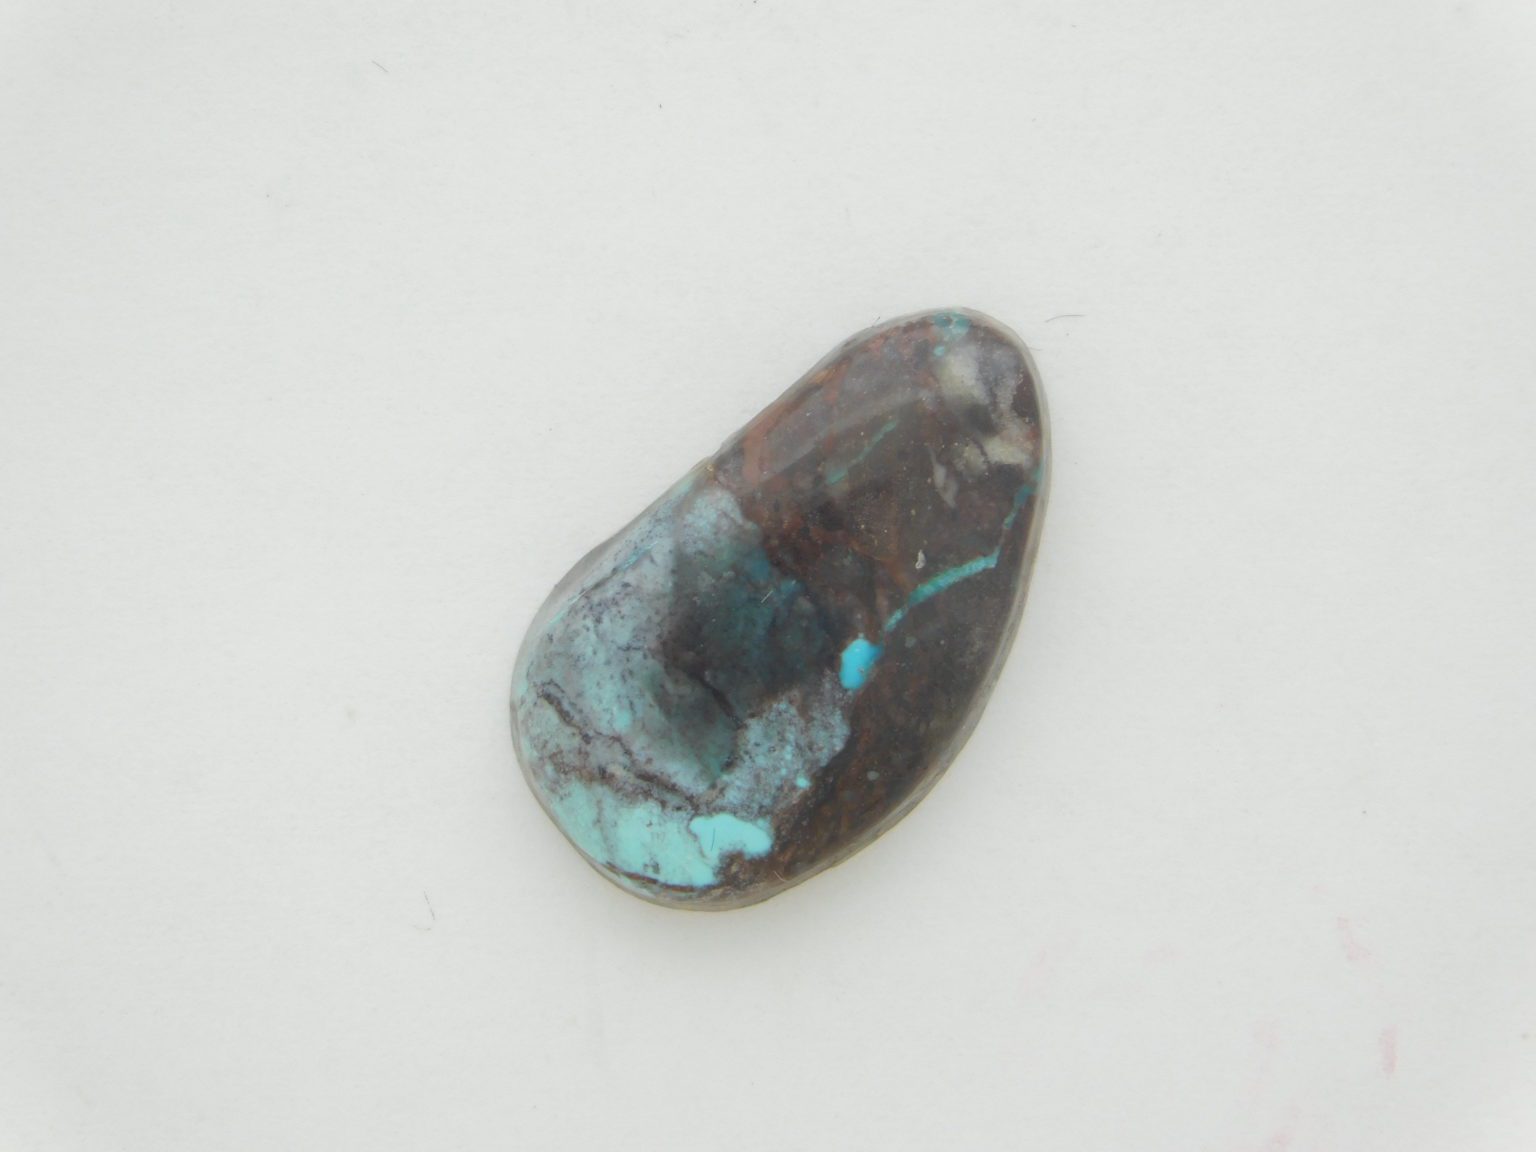 Smoky Bisbee Turquoise Cabochon 7.5 Carats